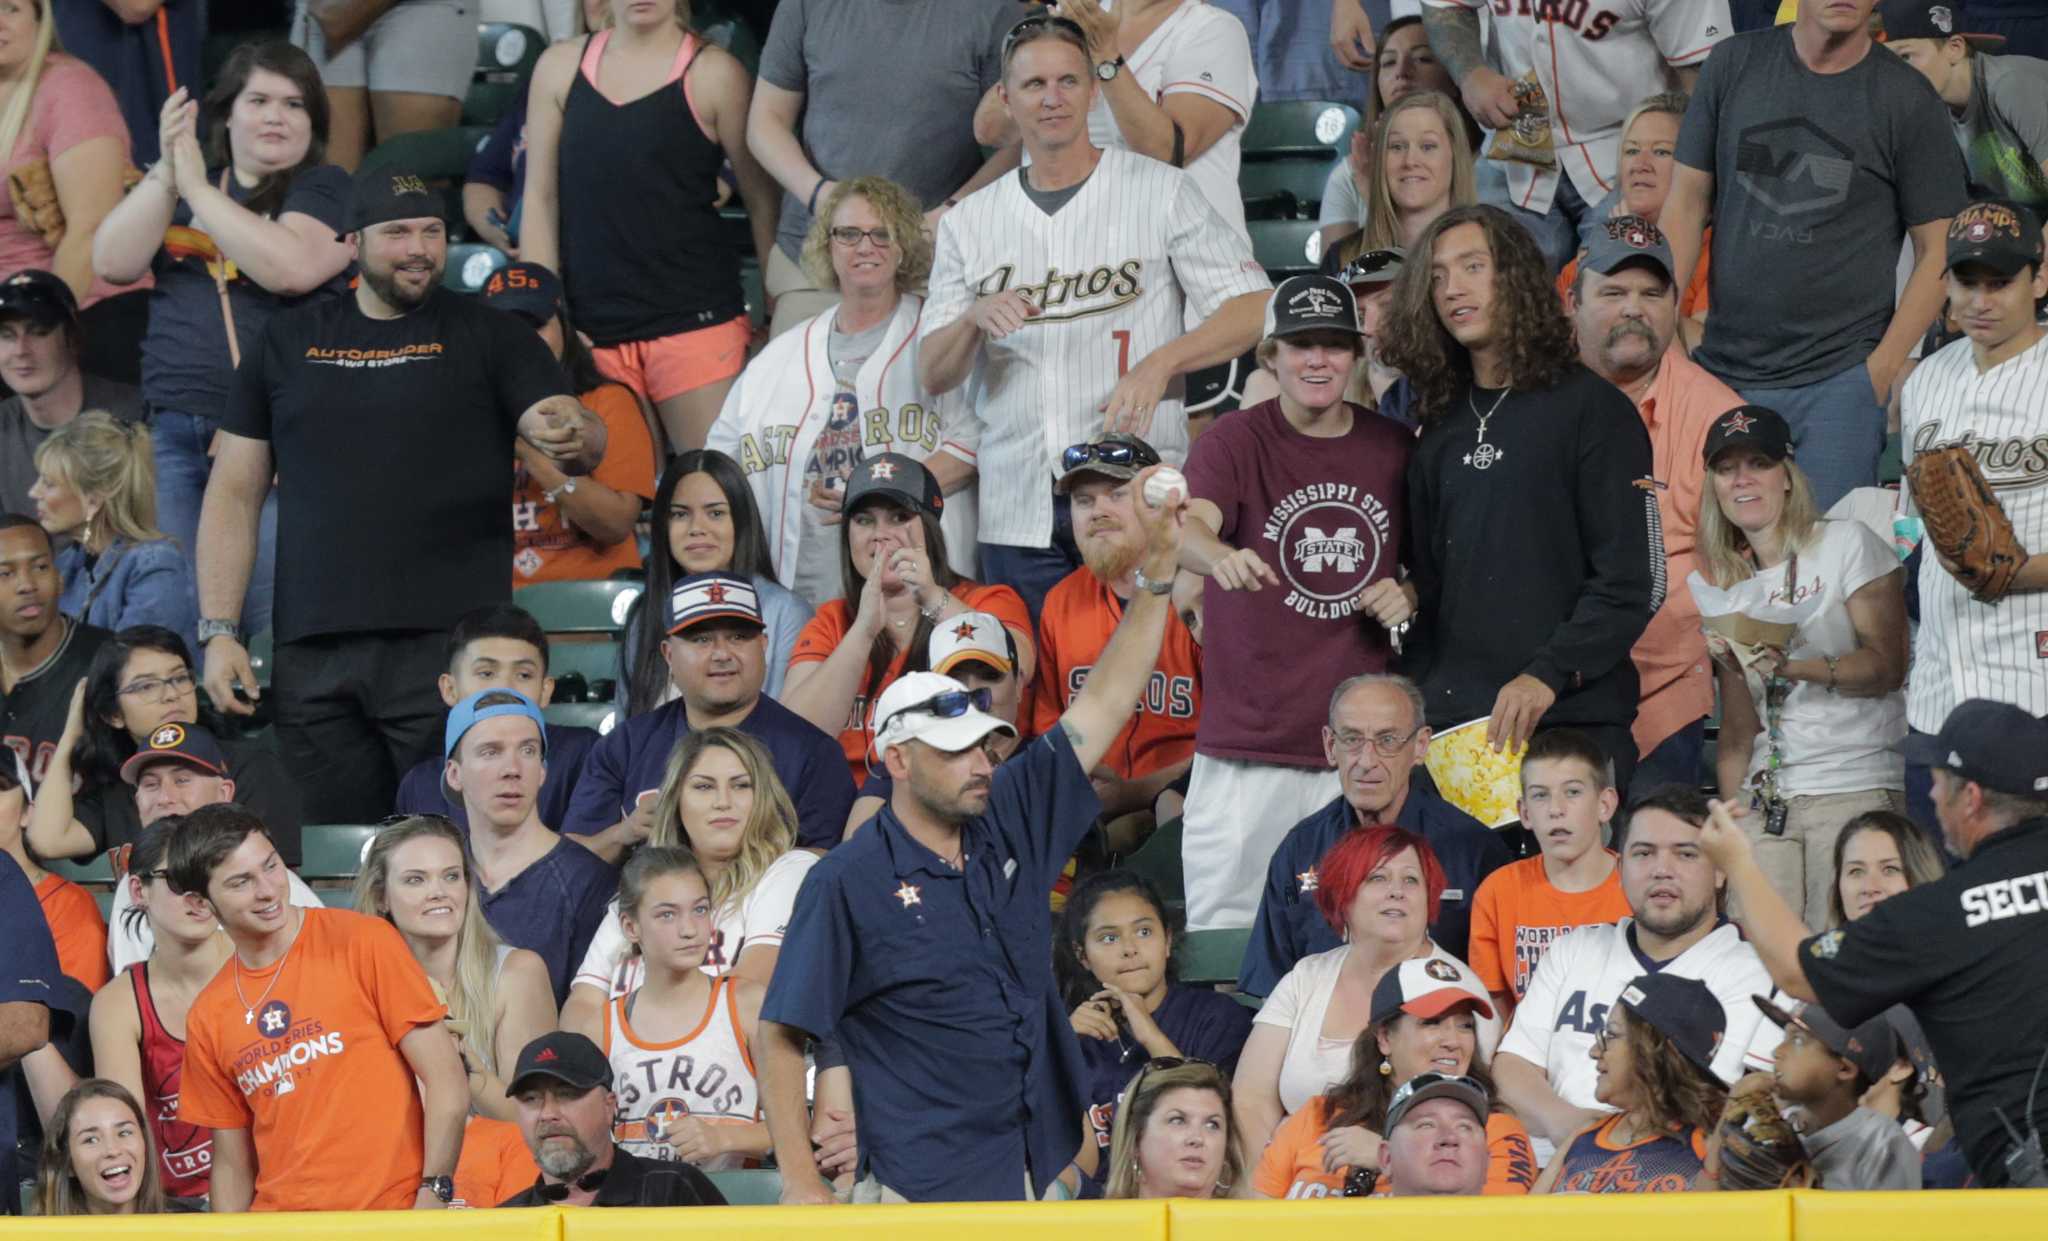 Astros fan totally makes up for interference with incredible interview